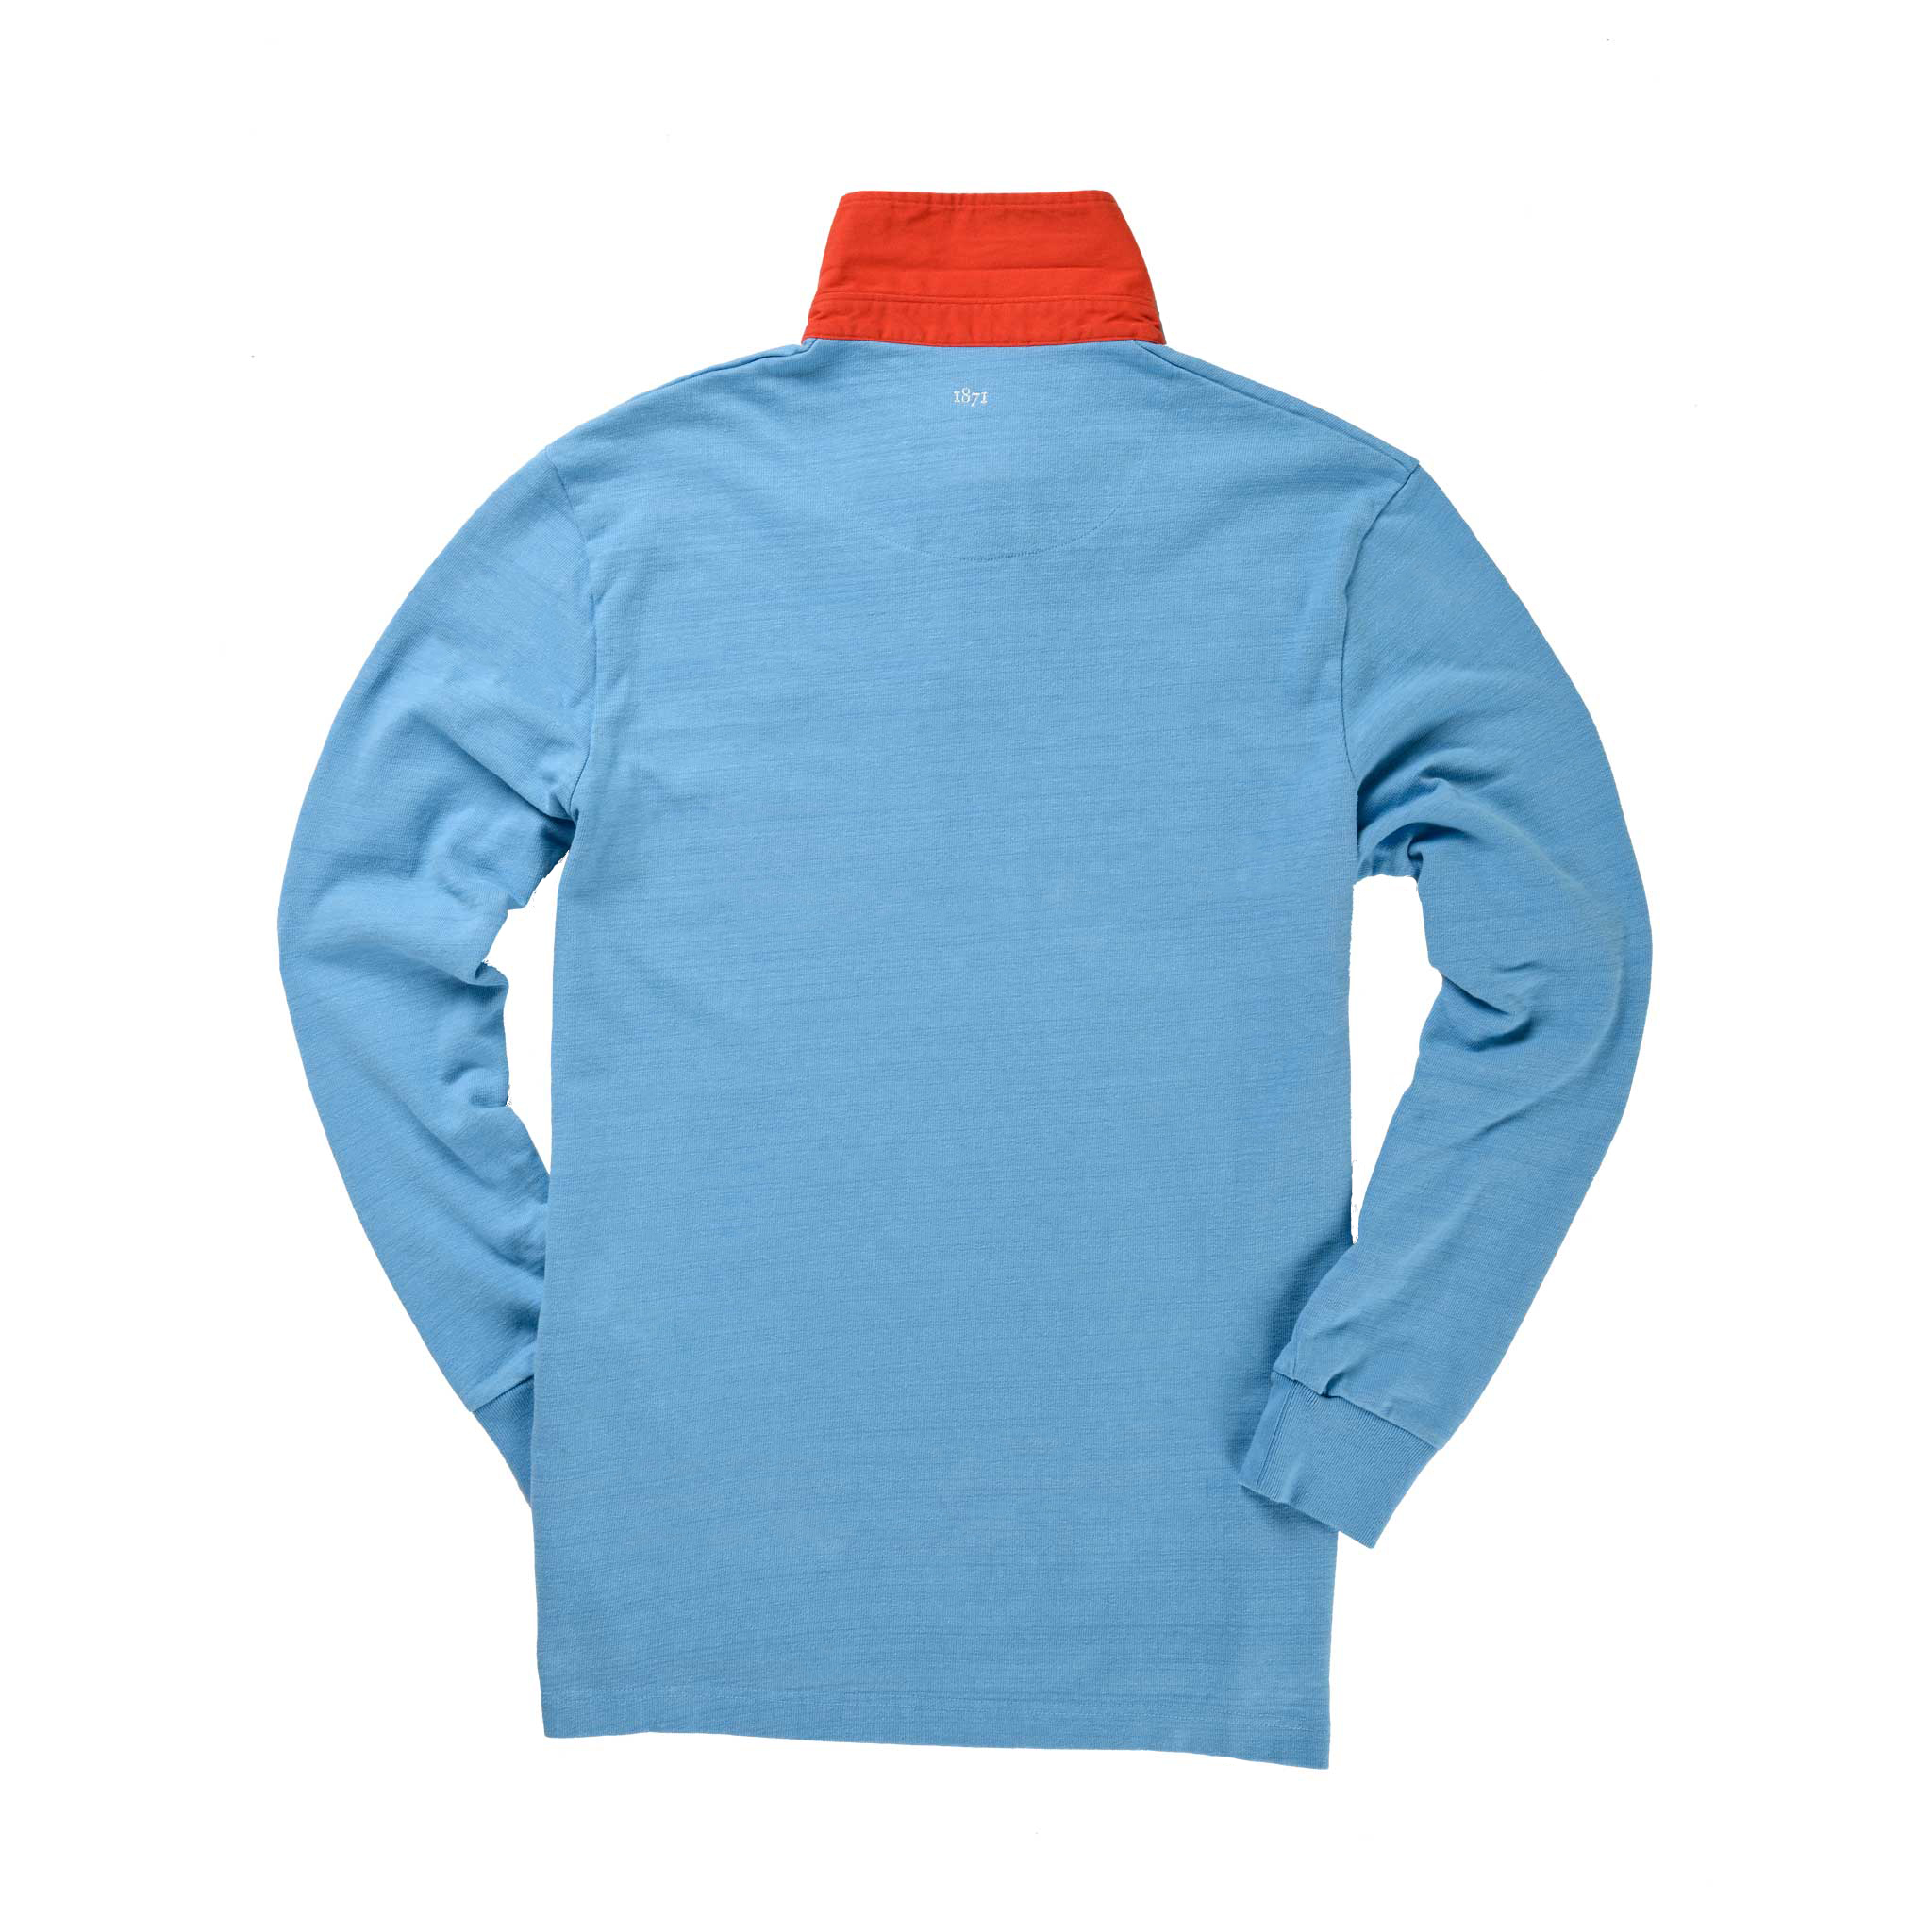 Azure Blue with Red Collar_1871 Rugby Shirt_Back